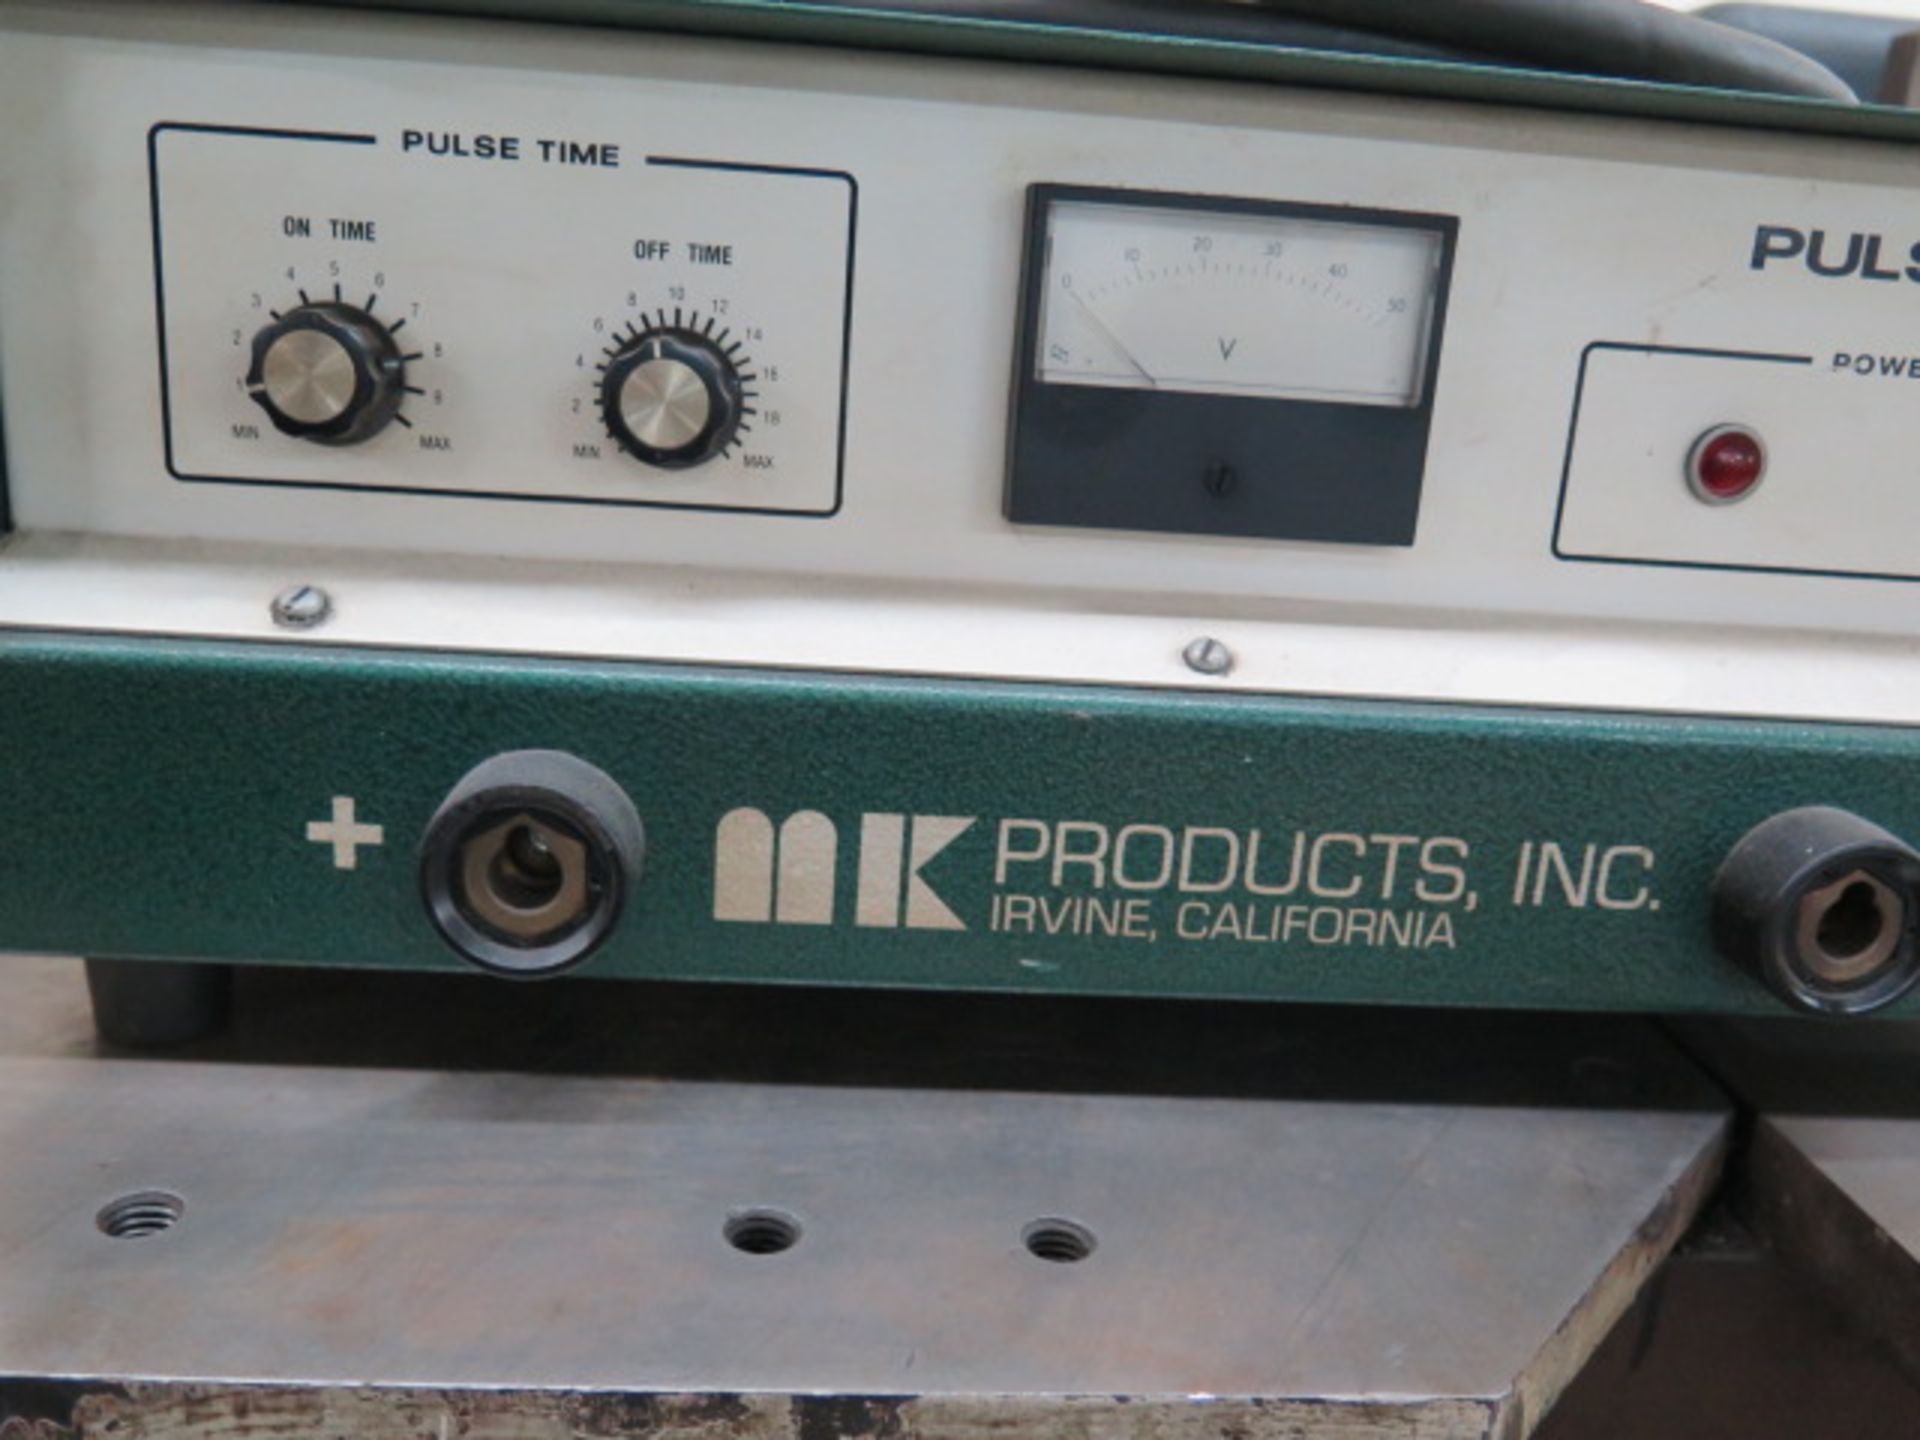 MK Products mdl. 158-001 "Pulse +" CV to Pulsed Wave Converters/n 0919 (SOLD AS-IS - NO WARRANTY) - Image 4 of 4